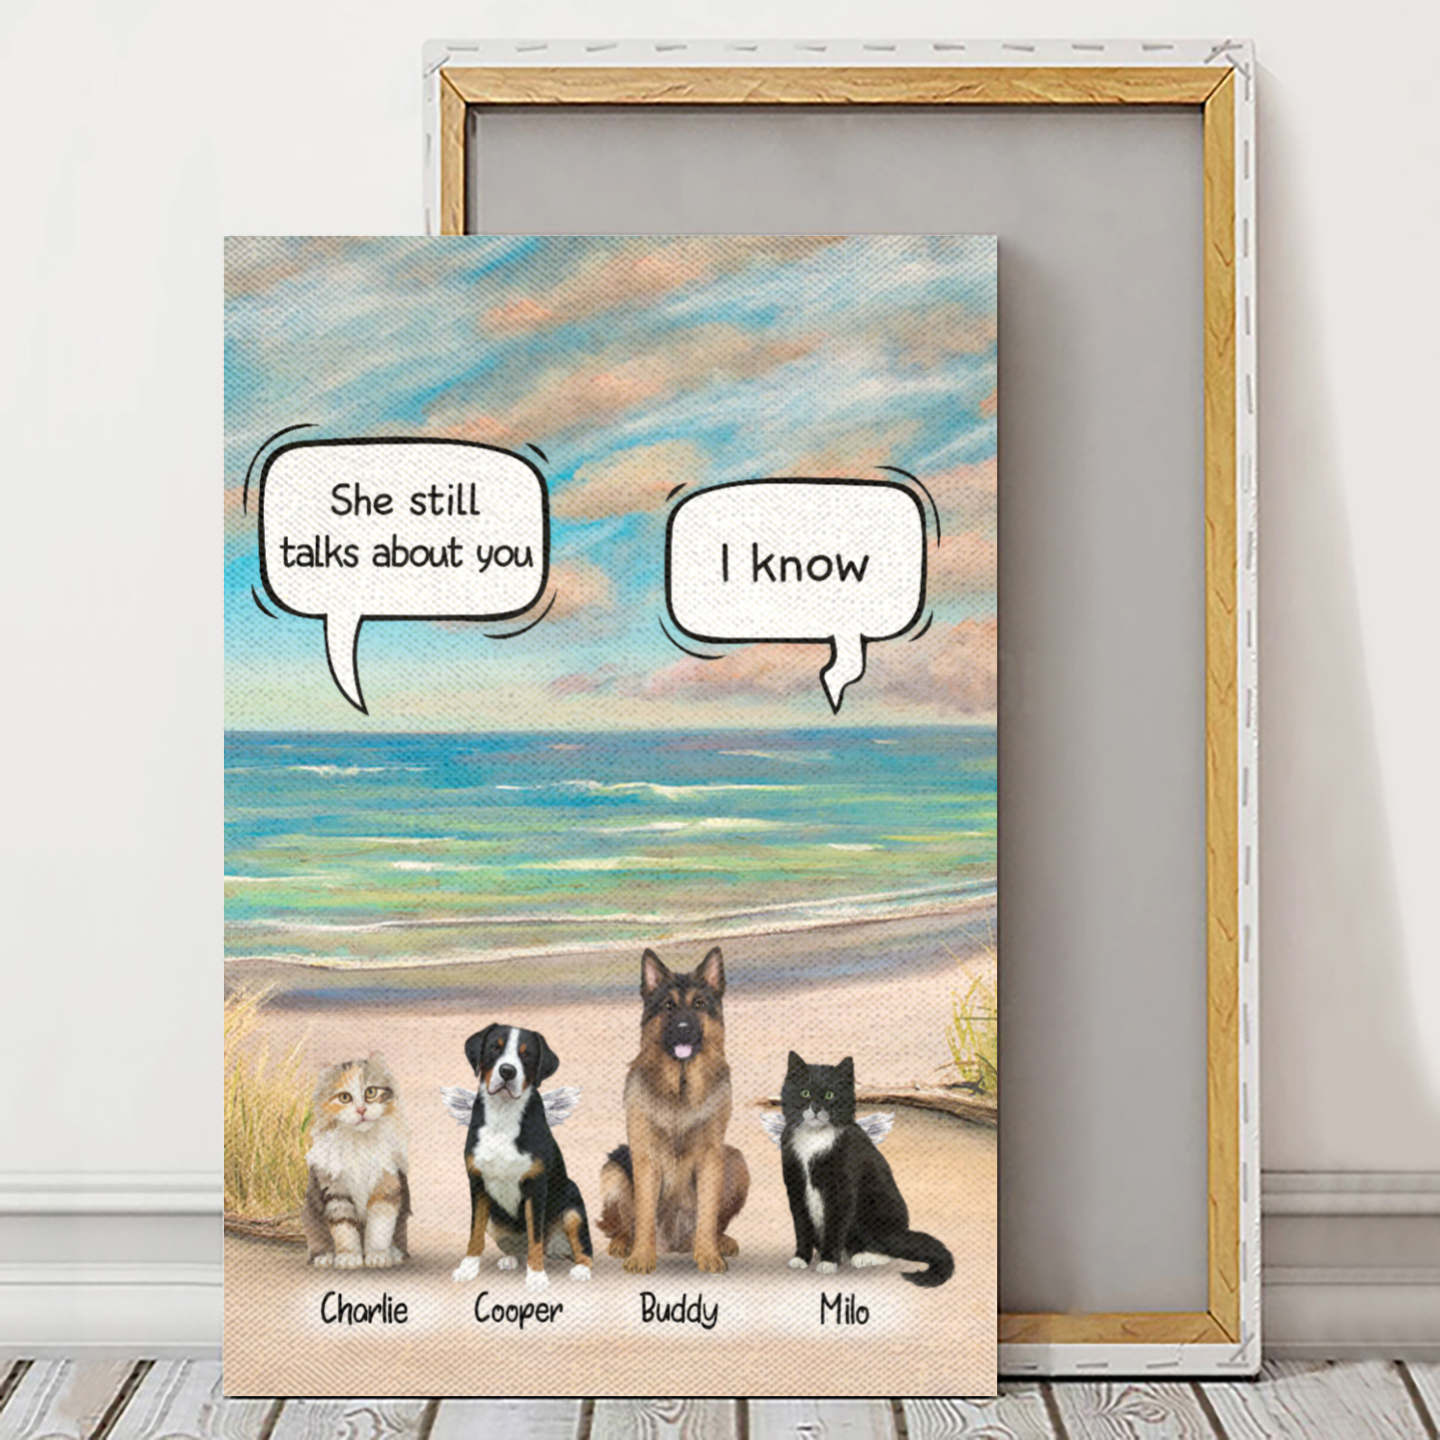 Ciaocustom Poster/Framed Canvas/Unframed Canvas, Custom Dog & Cat Breeds/Name/Background/Text, Dog & Cat Talking On The Beach